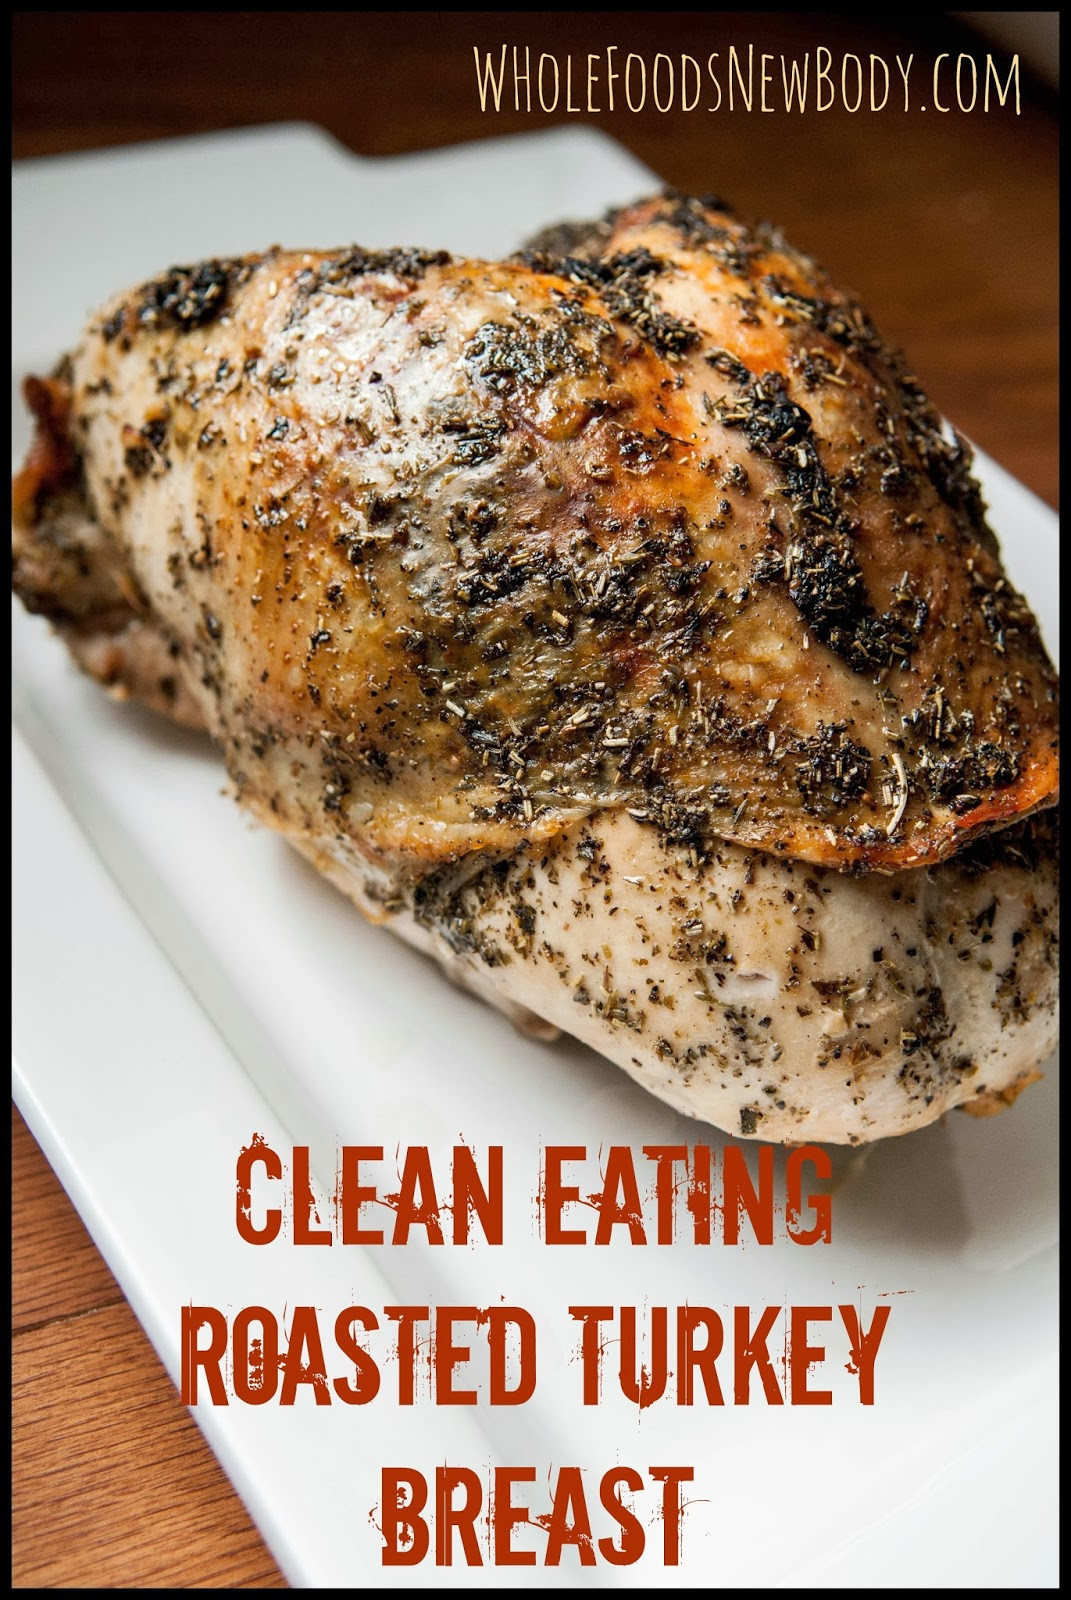 Whole Foods Turkey Thanksgiving
 Whole Foods New Body Clean Eating Roasted Turkey Breast